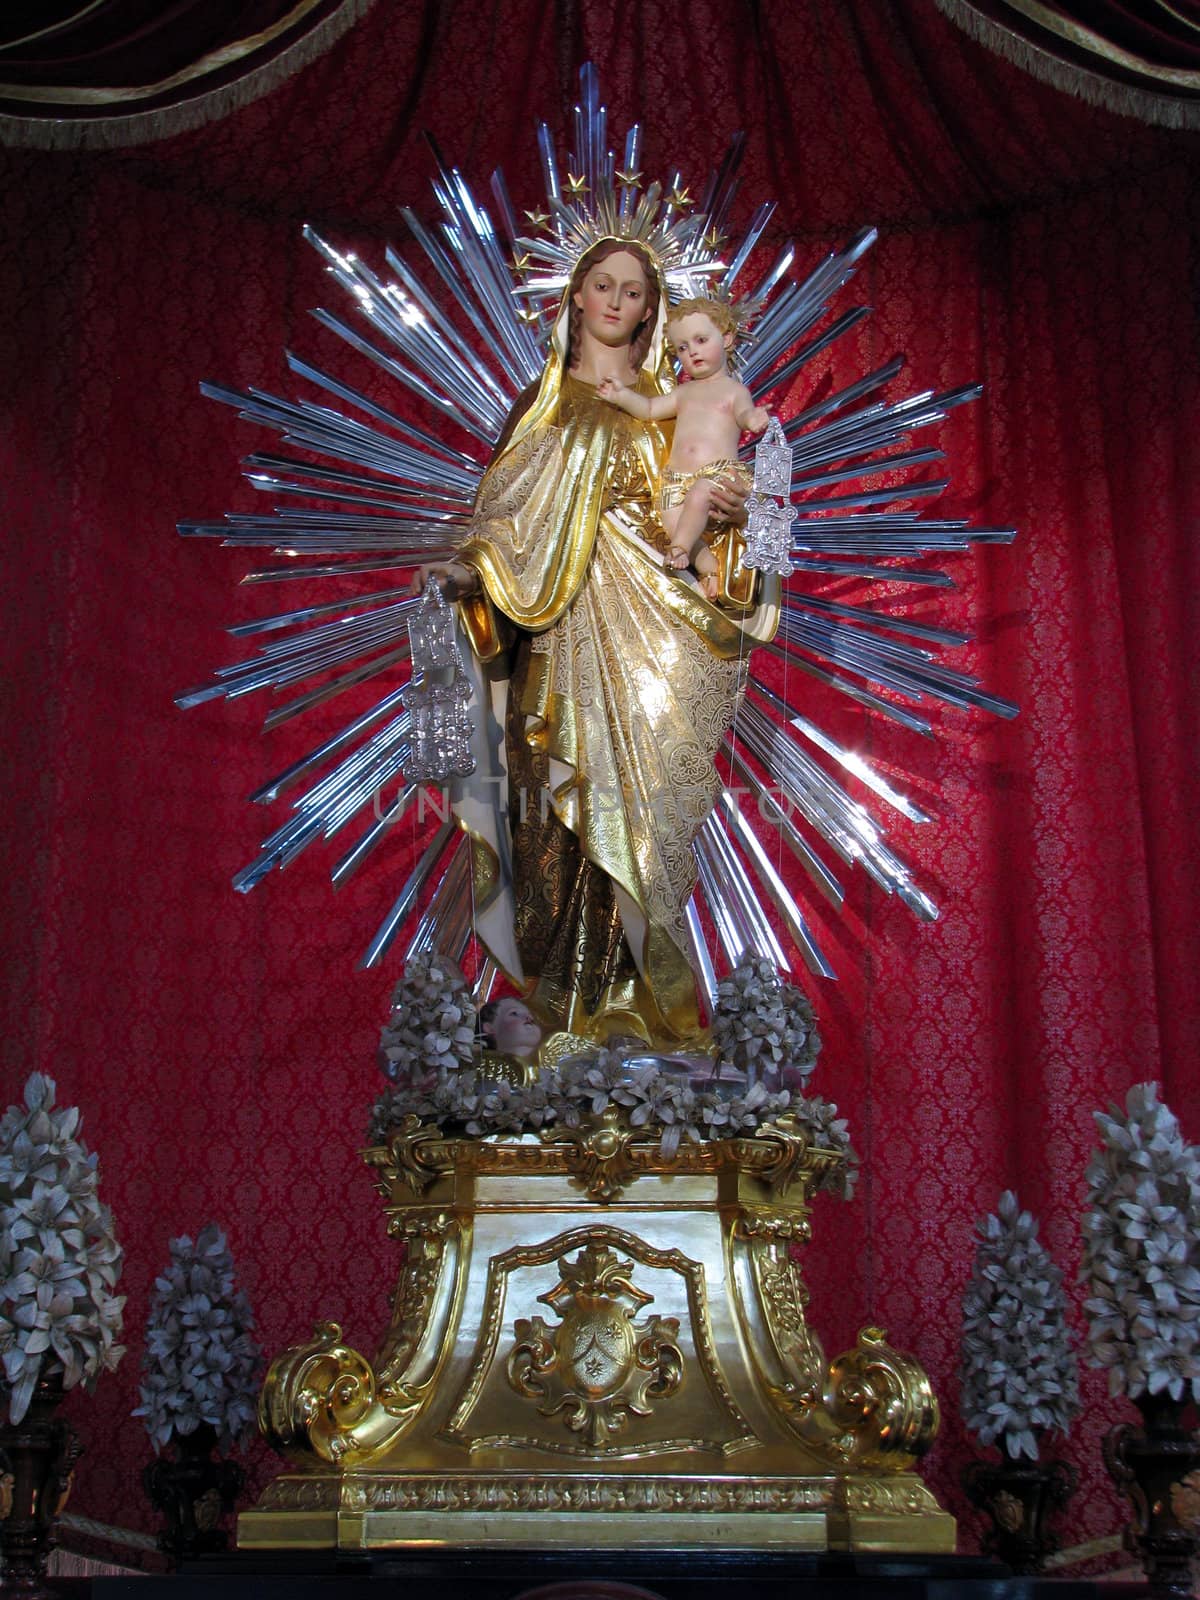 The statue of Our Lady of Mount Carmel in Gzira, malta.